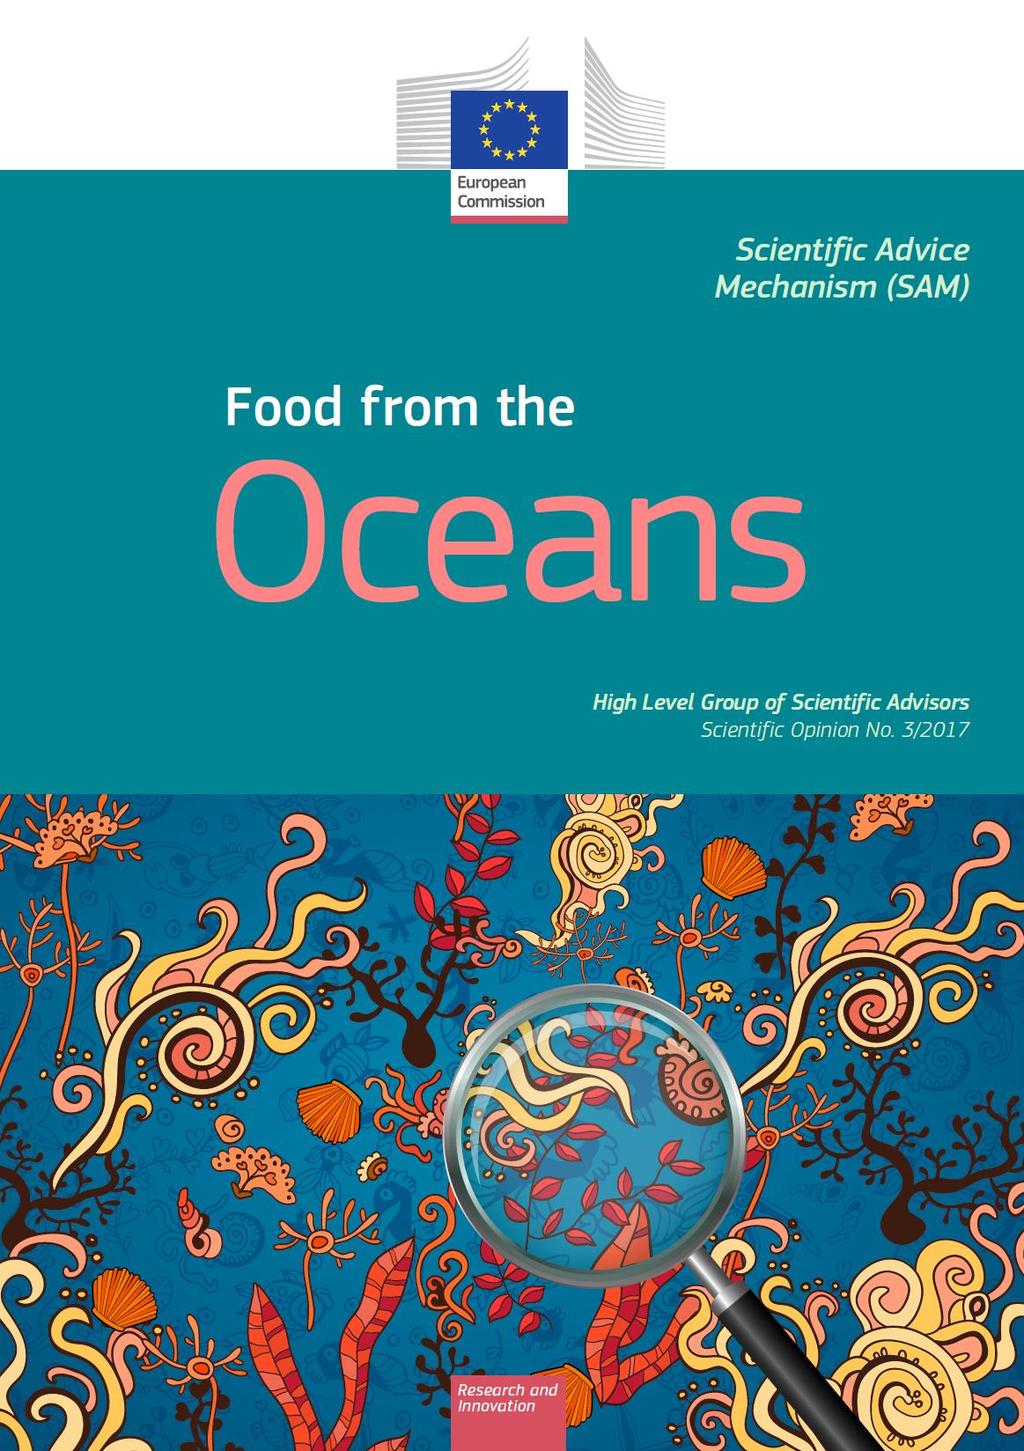 How can more food and biomass be obtained from the oceans in a way that does not deprive future generations of their benefits?